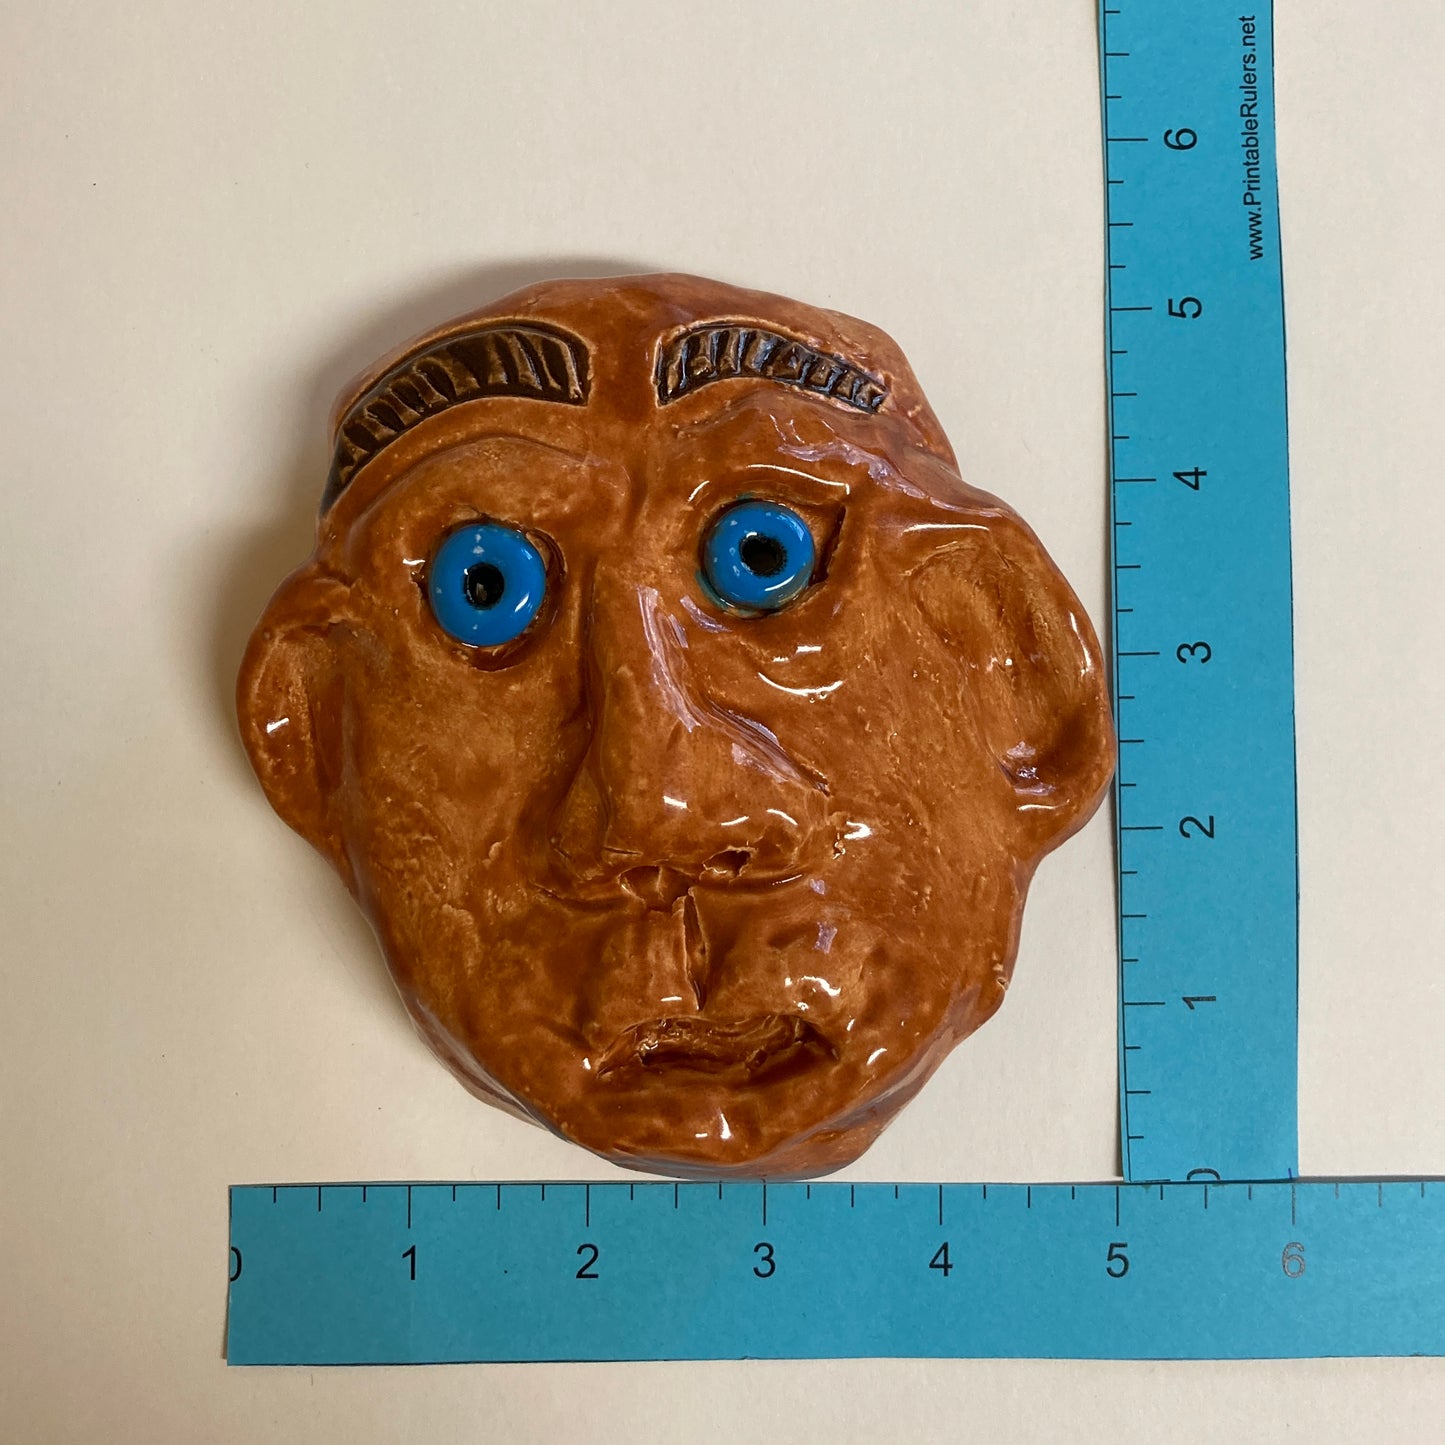 WATCH Resources Art Guild - Ceramic Arts Handmade Clay Crafts 5-inch x 5-inch Glazed Face by Lisa Uptain